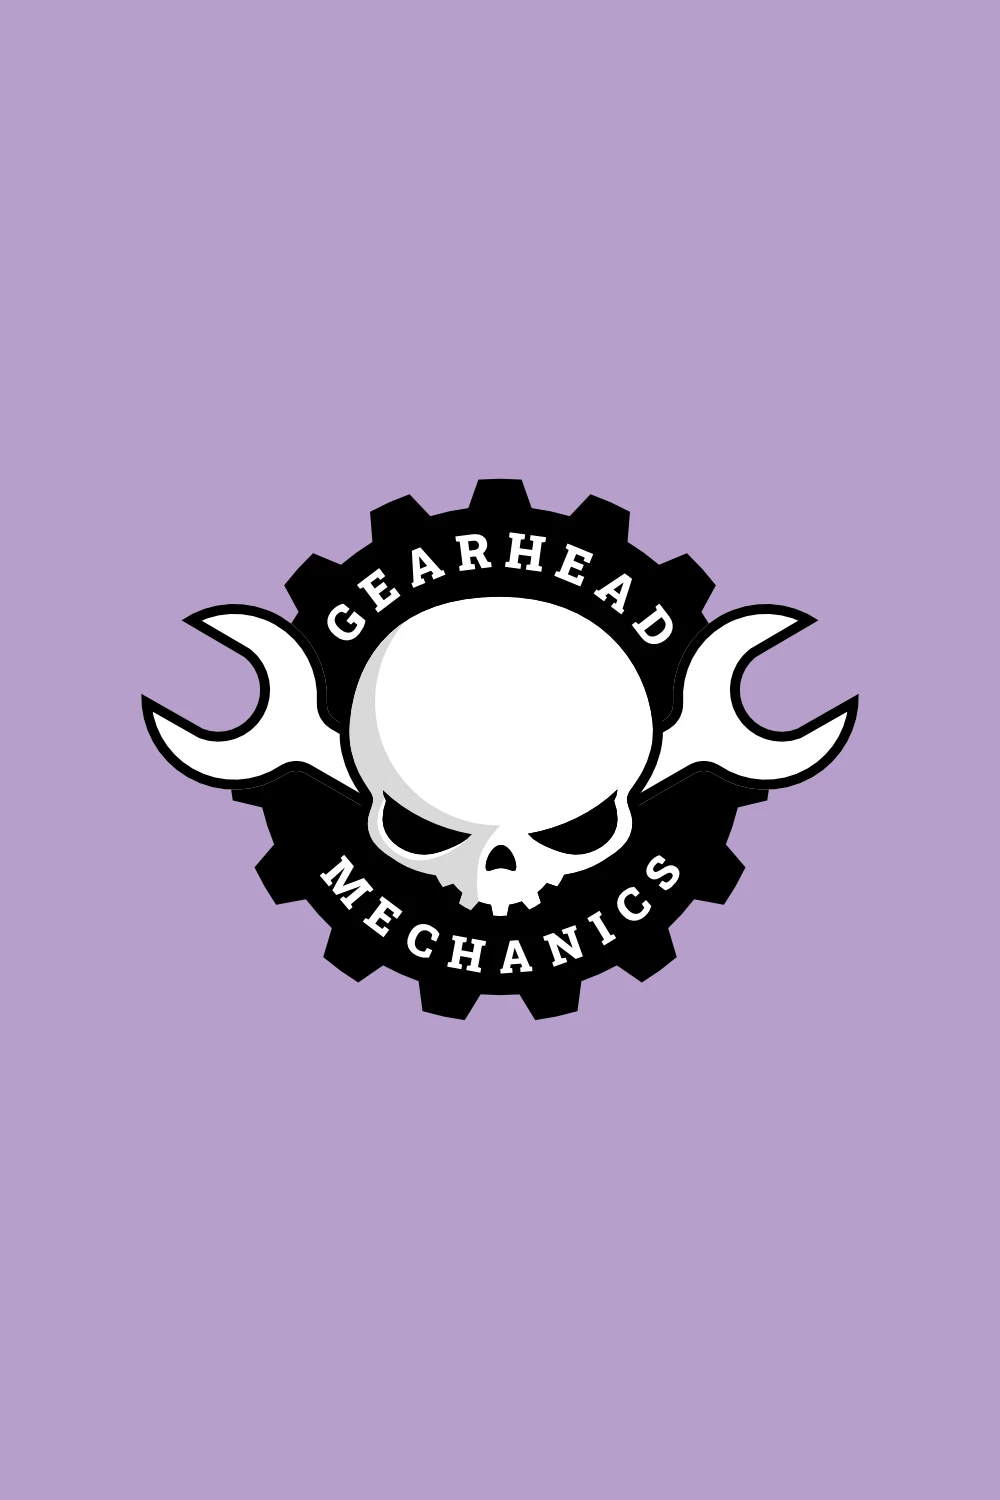 Recognizable Logo Design Of Gearhead Mechanics showing a white skull with gear teeth inside a black gear which also could be a tire.